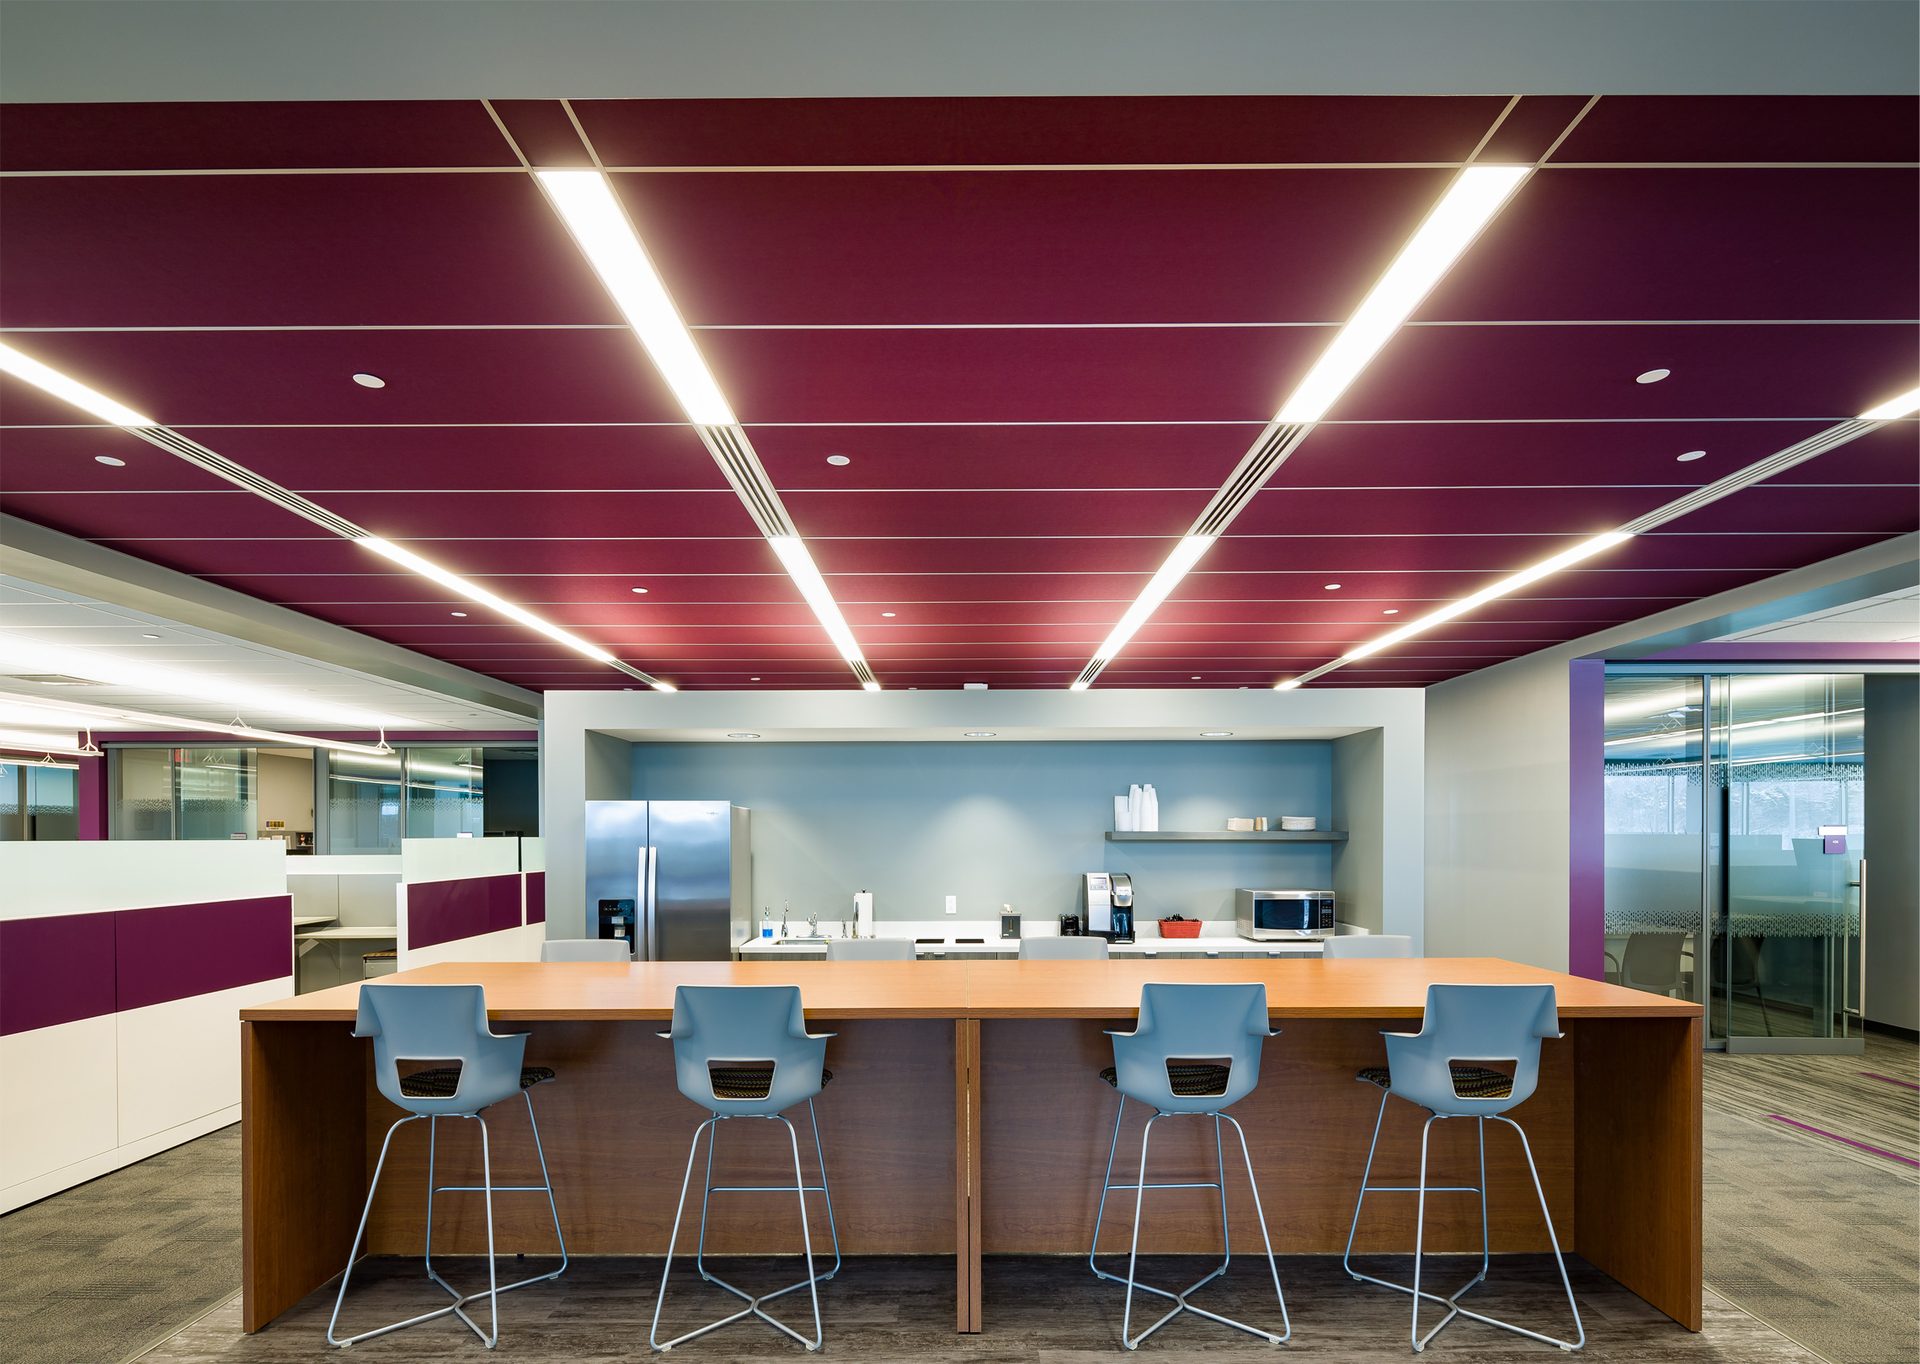 Office lunch room with deep burgundy red ceiling system.